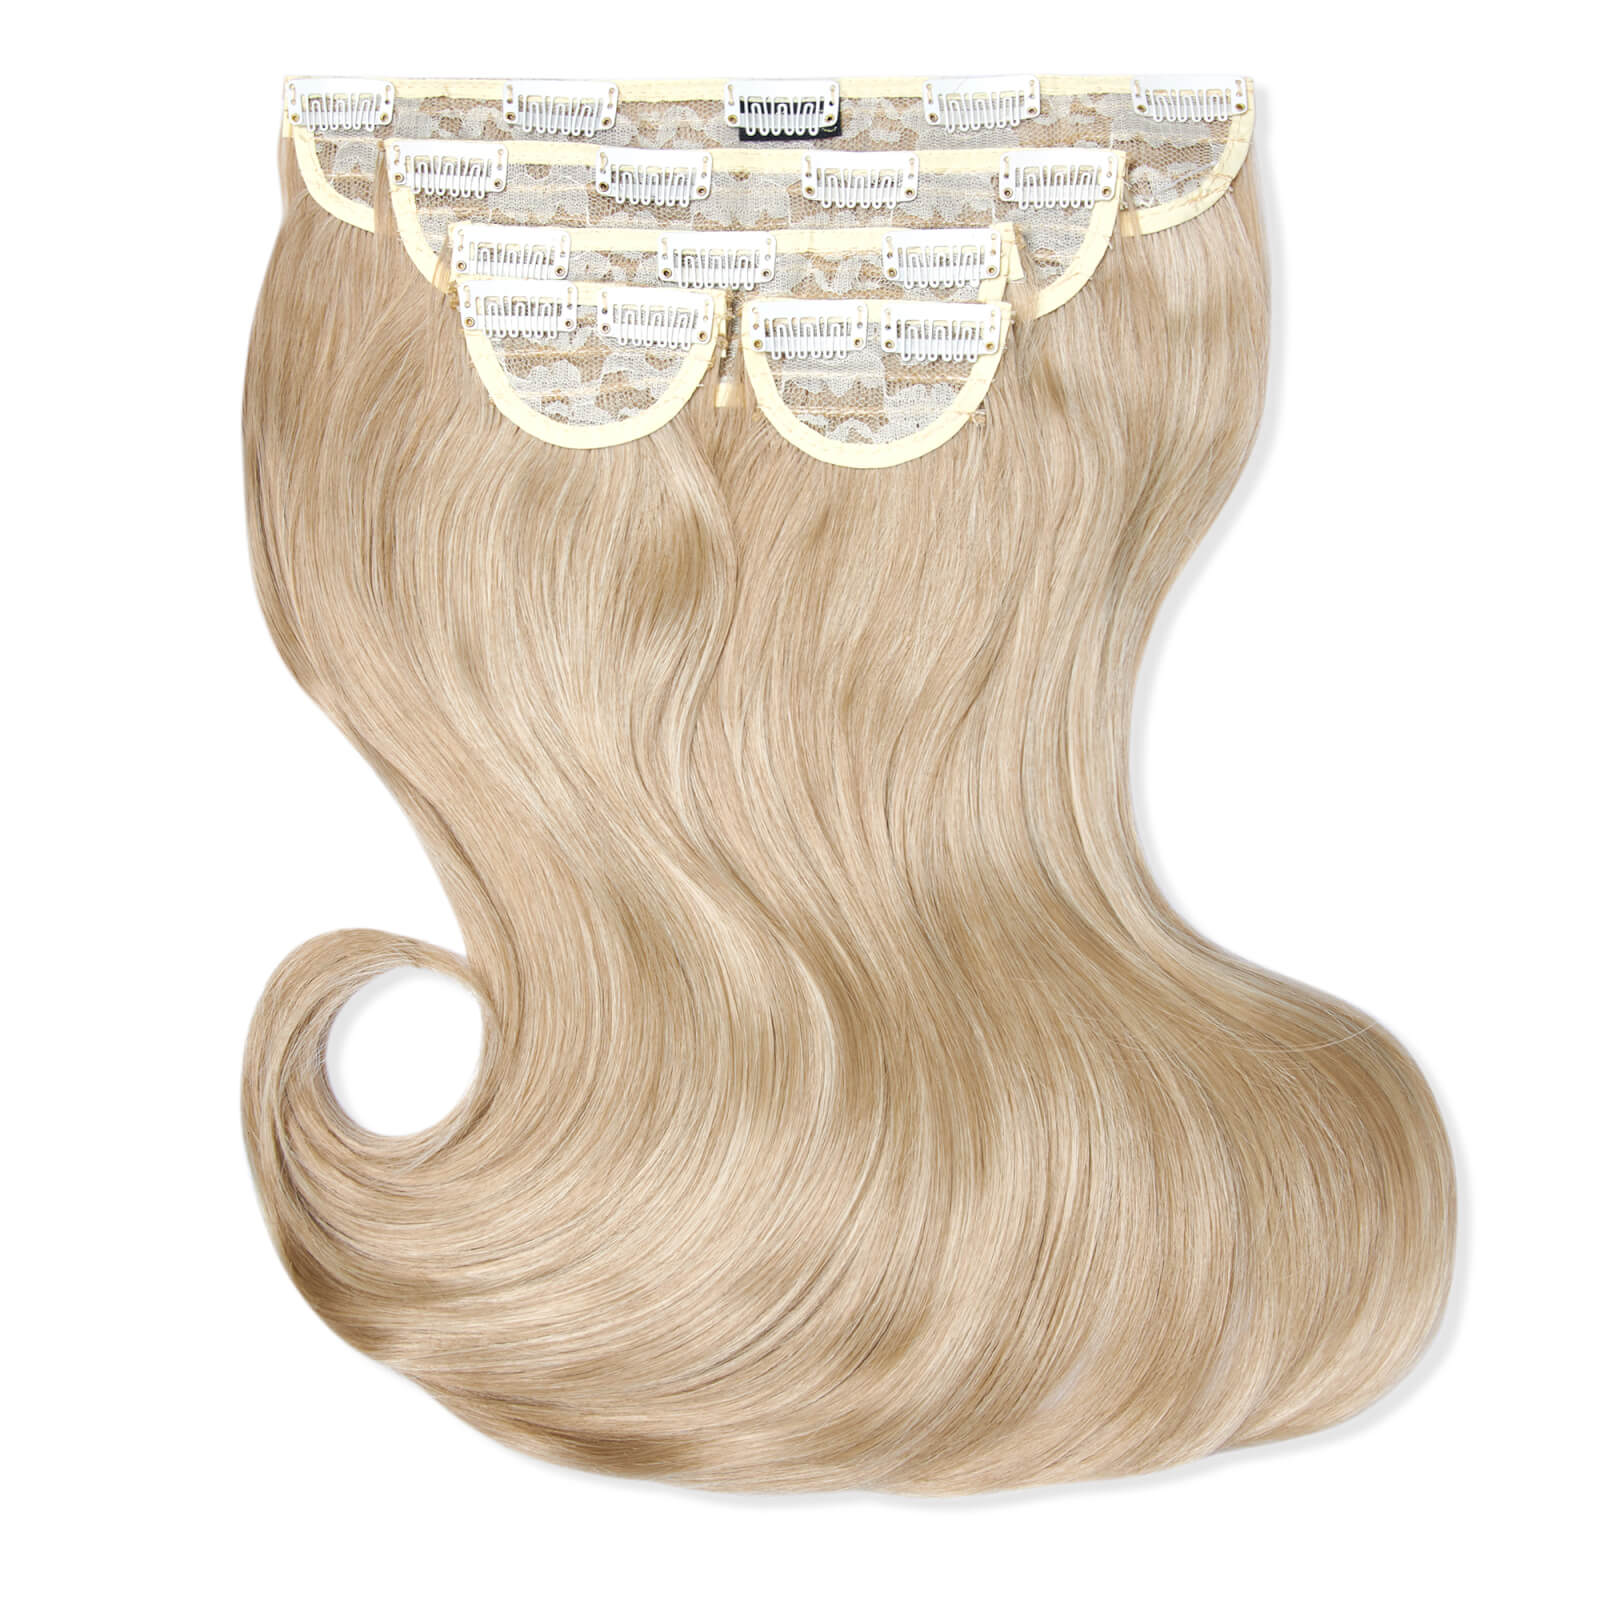 Lullabellz Super Thick 16  5 Piece Blow Dry Wavy Clip In Extensions (various Shades) - California Bl In California Blonde